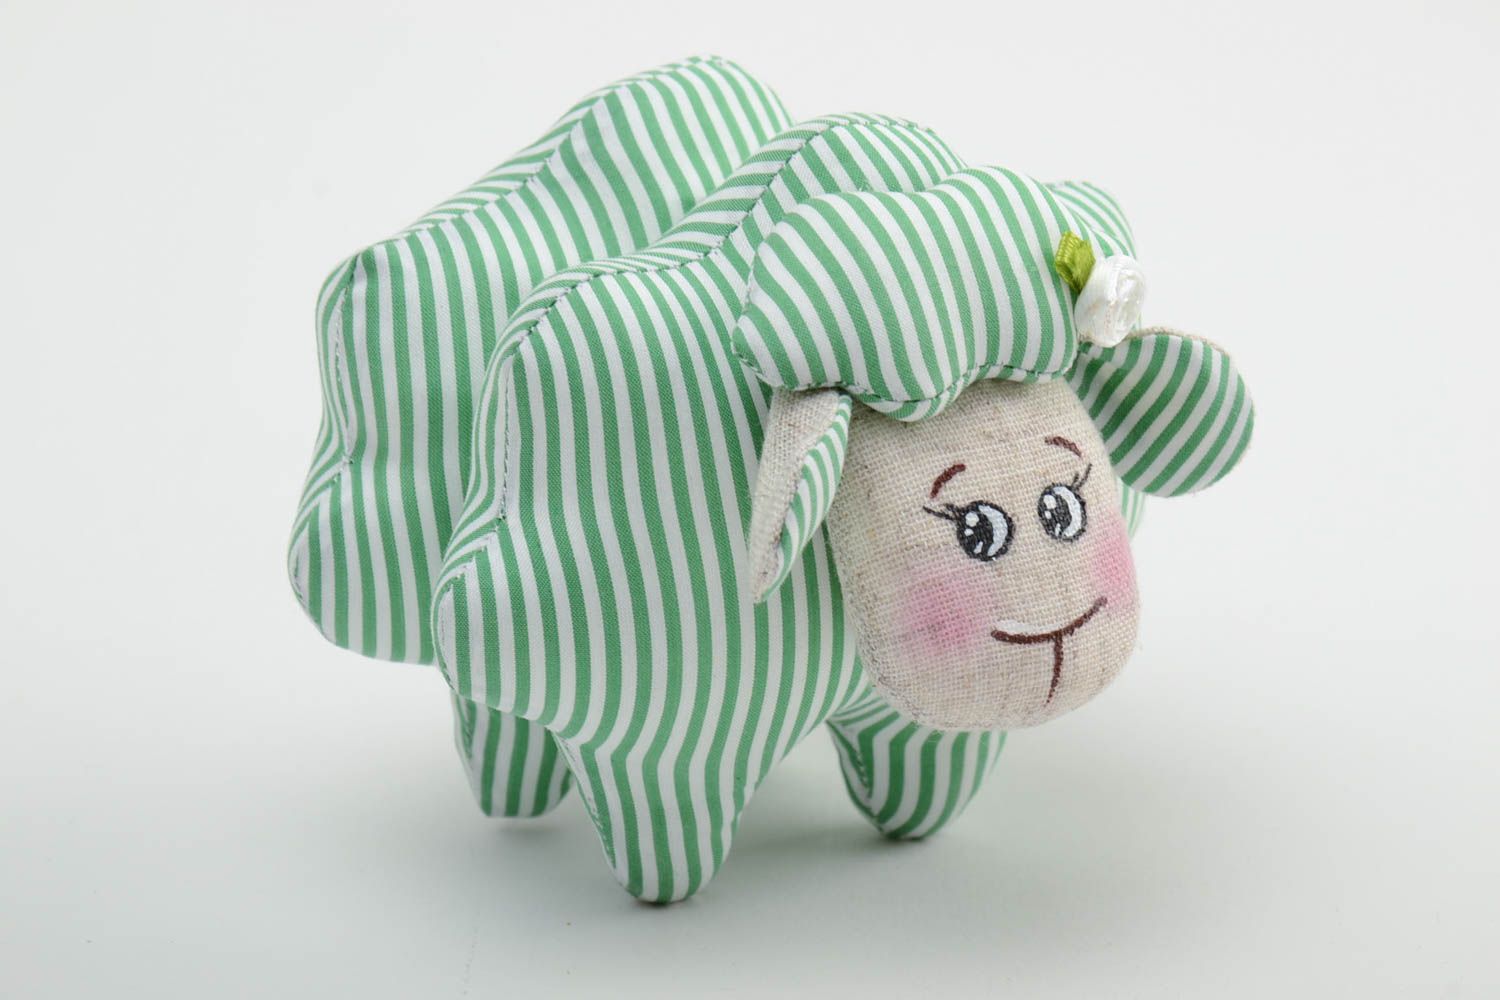 Handmade small soft toy sewn of white and green striped linen fabric cute lamb photo 2